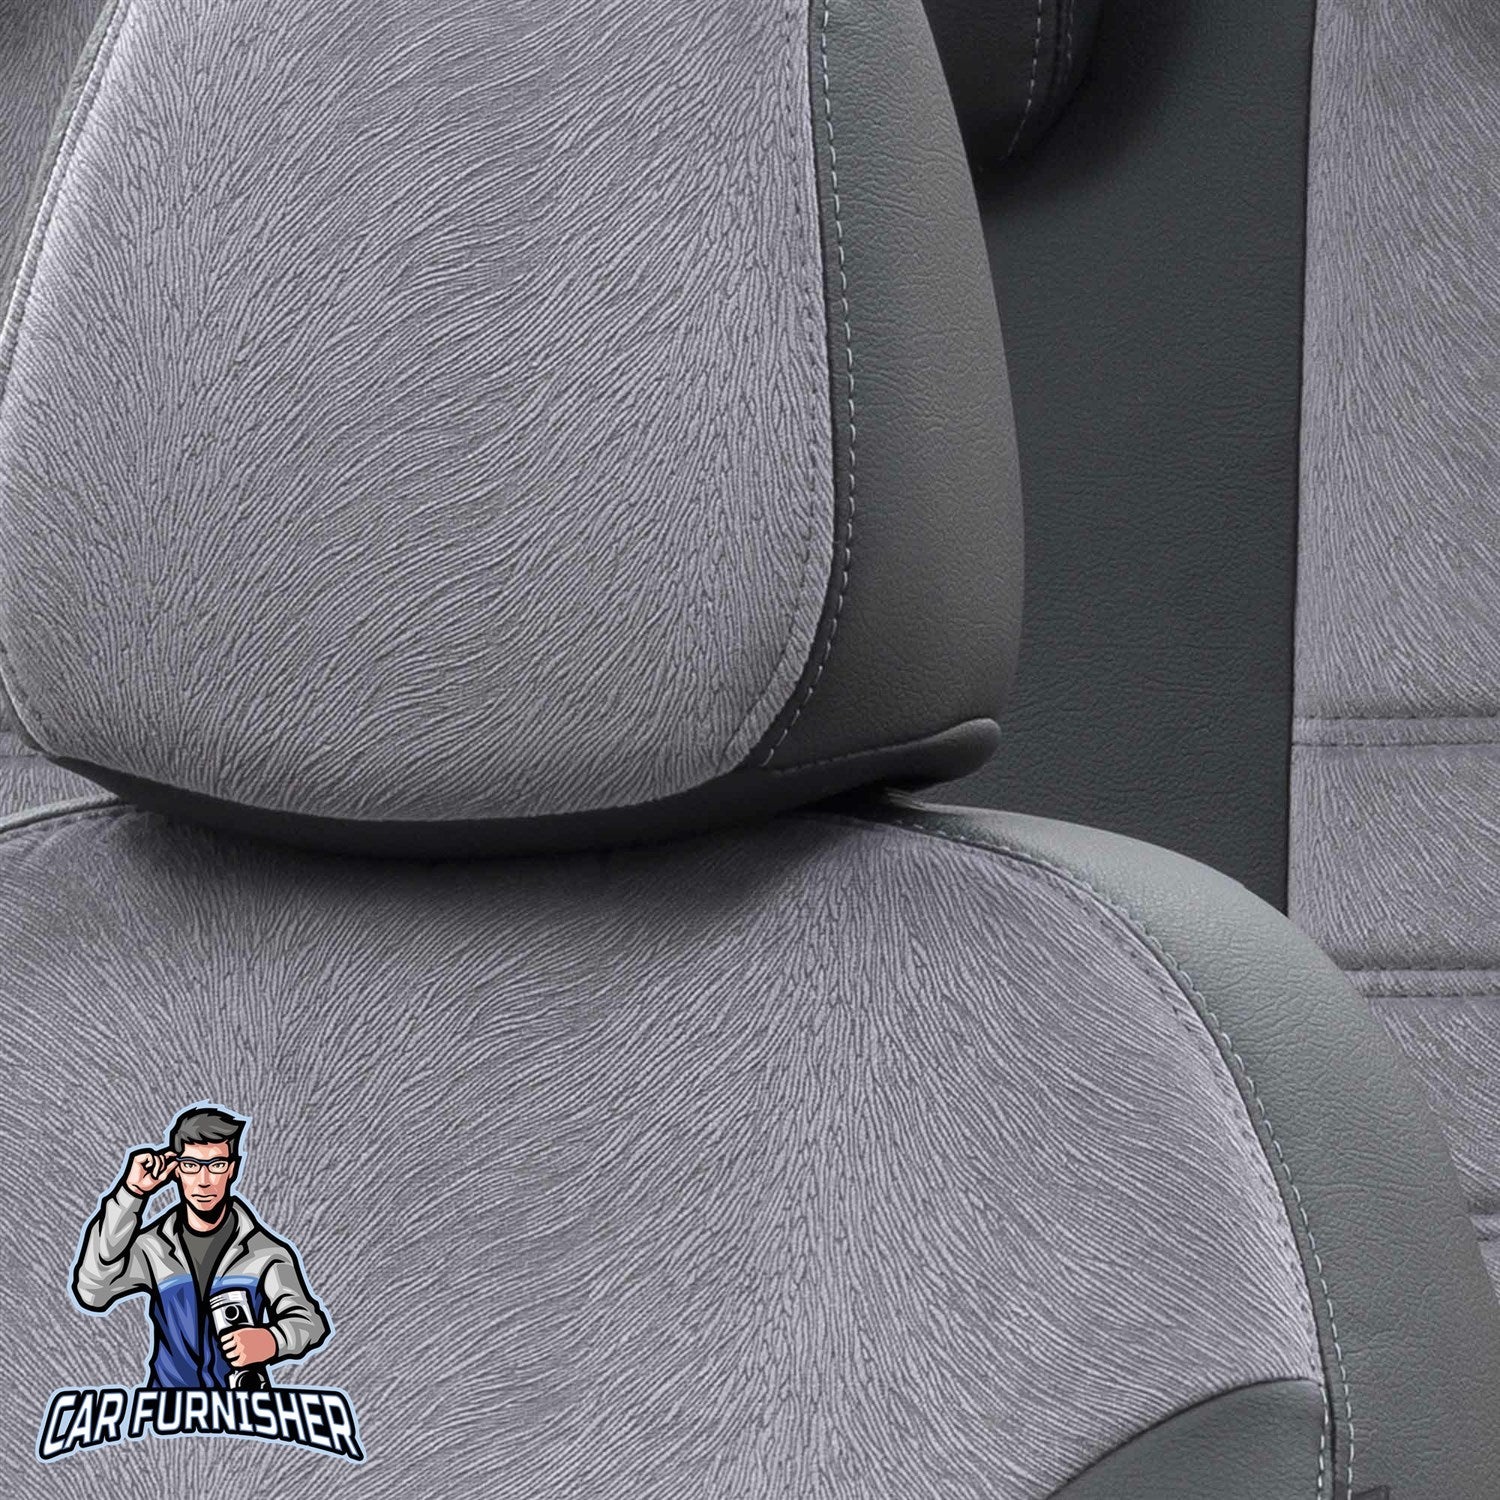 Volkswagen CC Seat Cover London Foal Feather Design Smoked Black Leather & Foal Feather